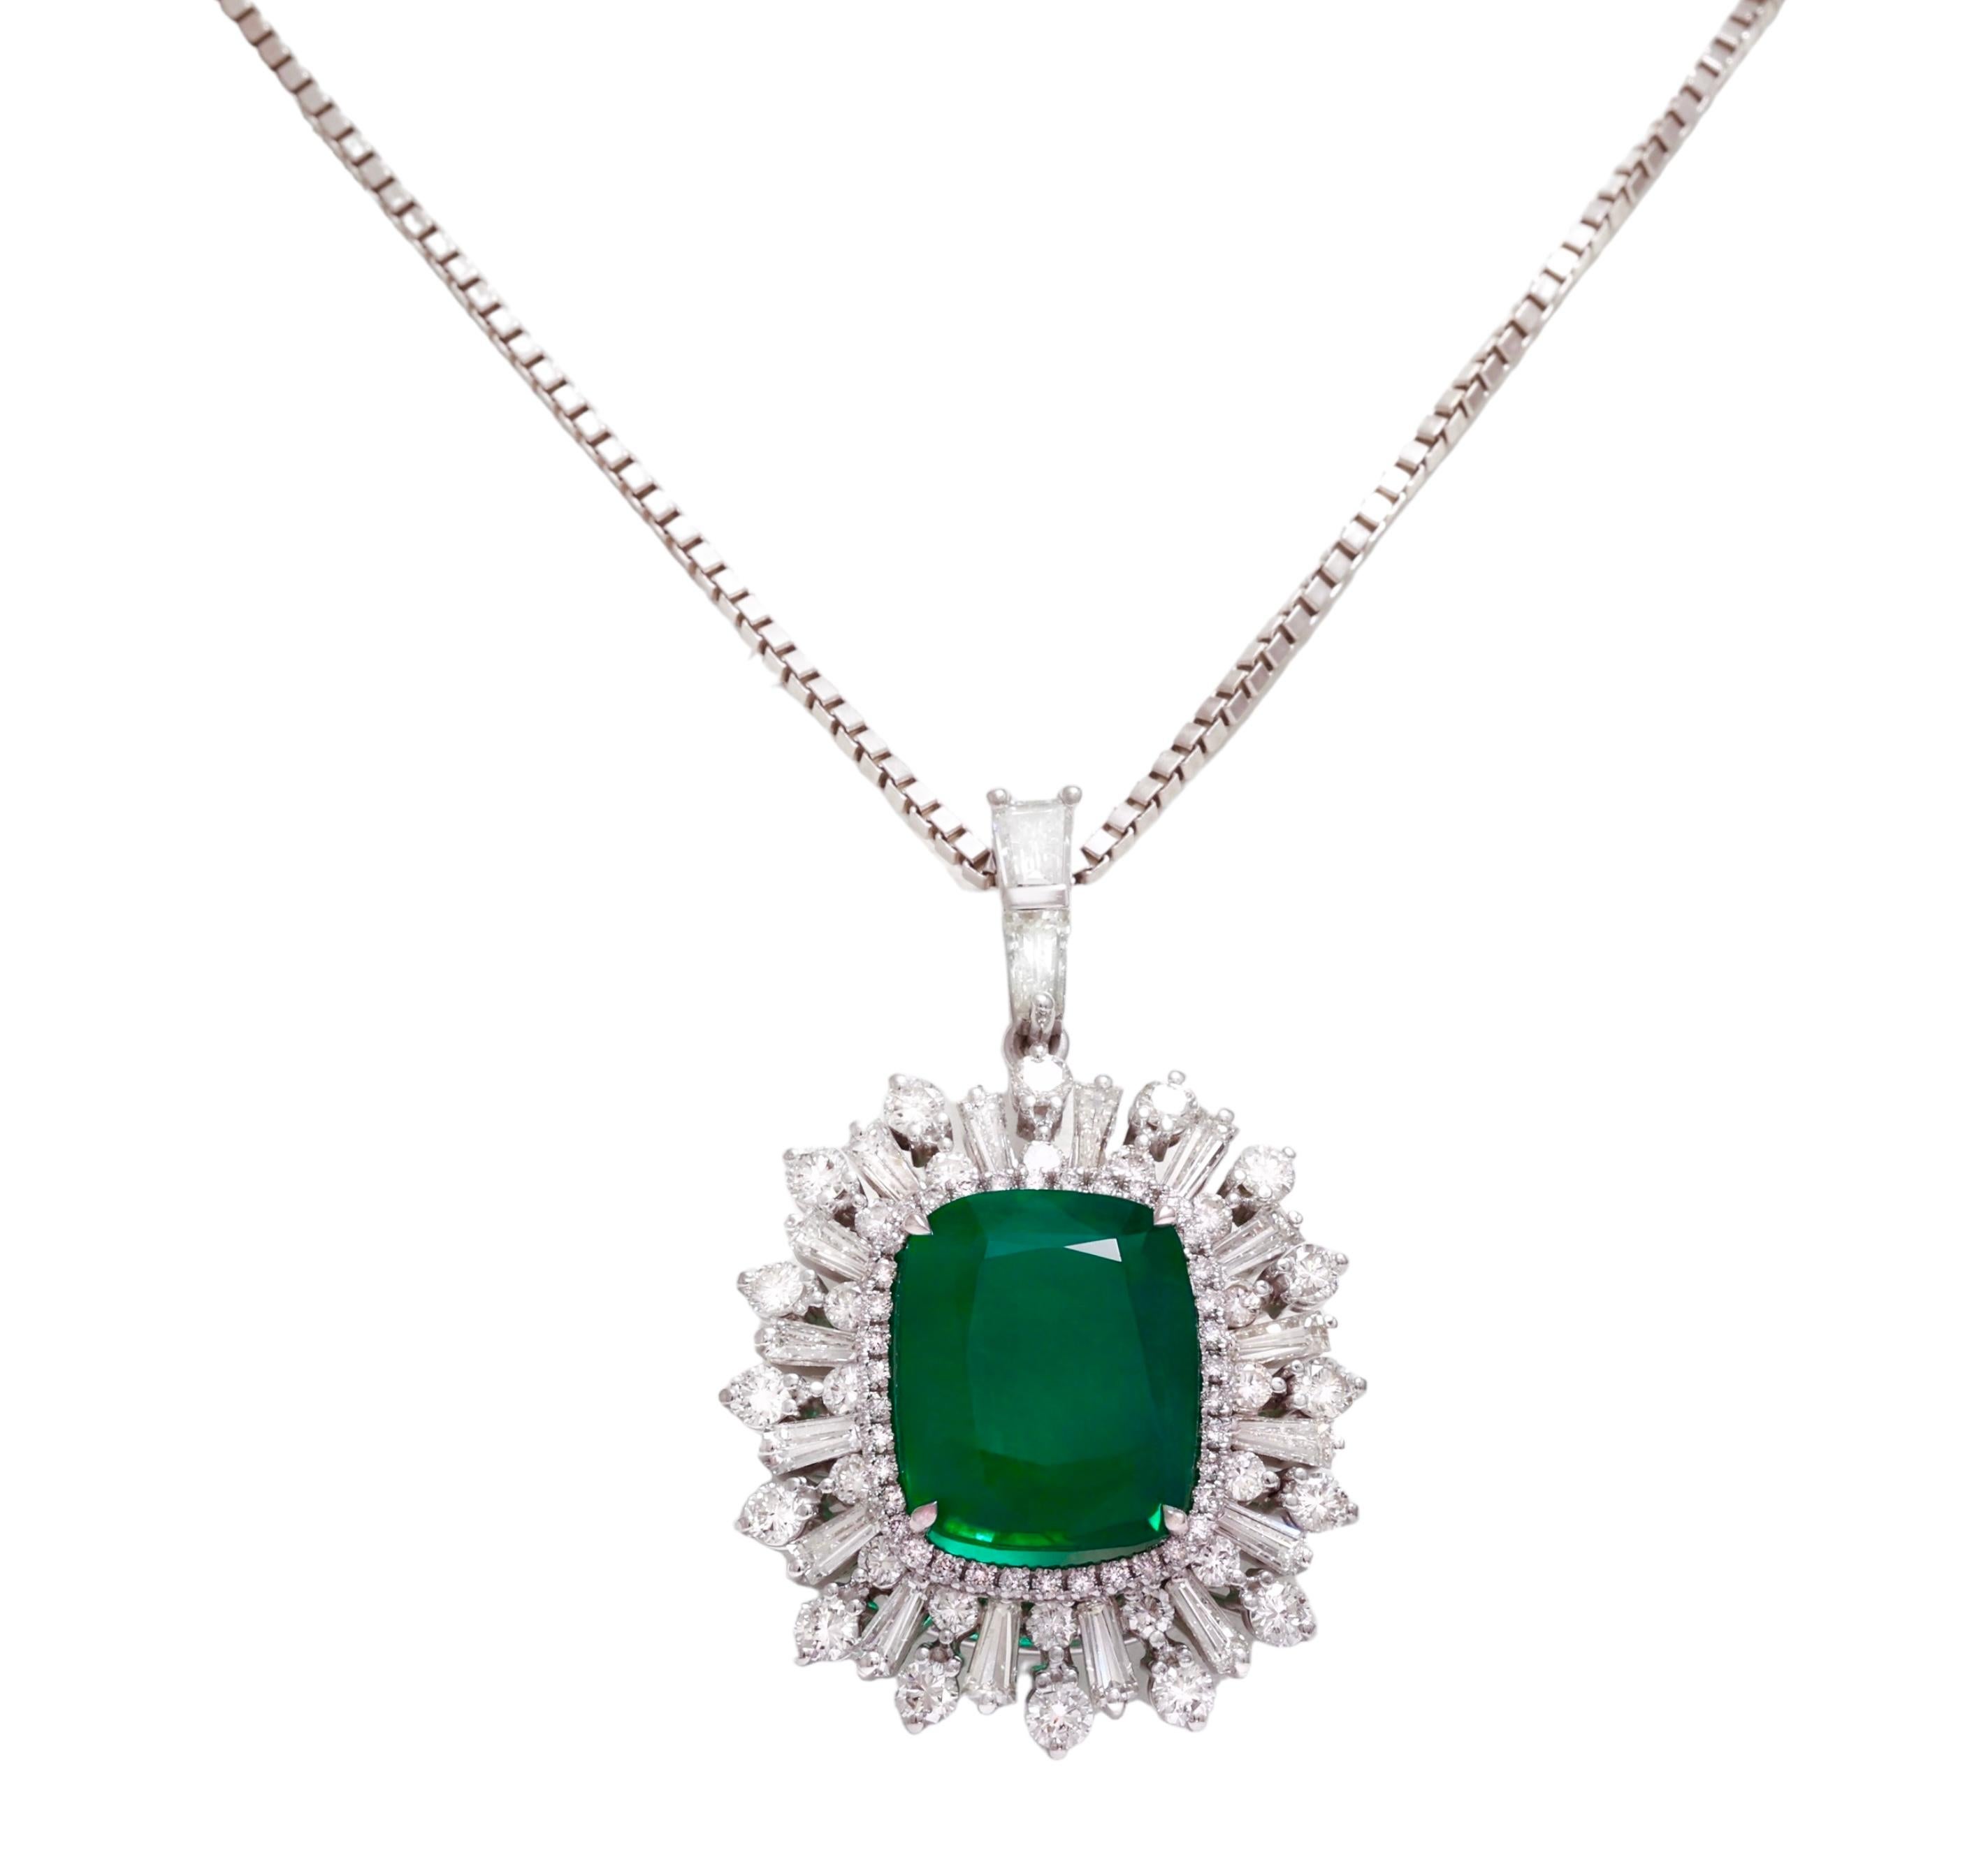 Stunning 18 Kt White Gold Pendant / Hanger Intense Green Emerald 10.54 Ct & Diamonds

Emerald: Intense green, cushion shape Zambia emerald, 10.54 ct. Comes with CGL certificate

Diamonds: Tapered cut diamonds together 2.46 ct.
Brilliant cut: